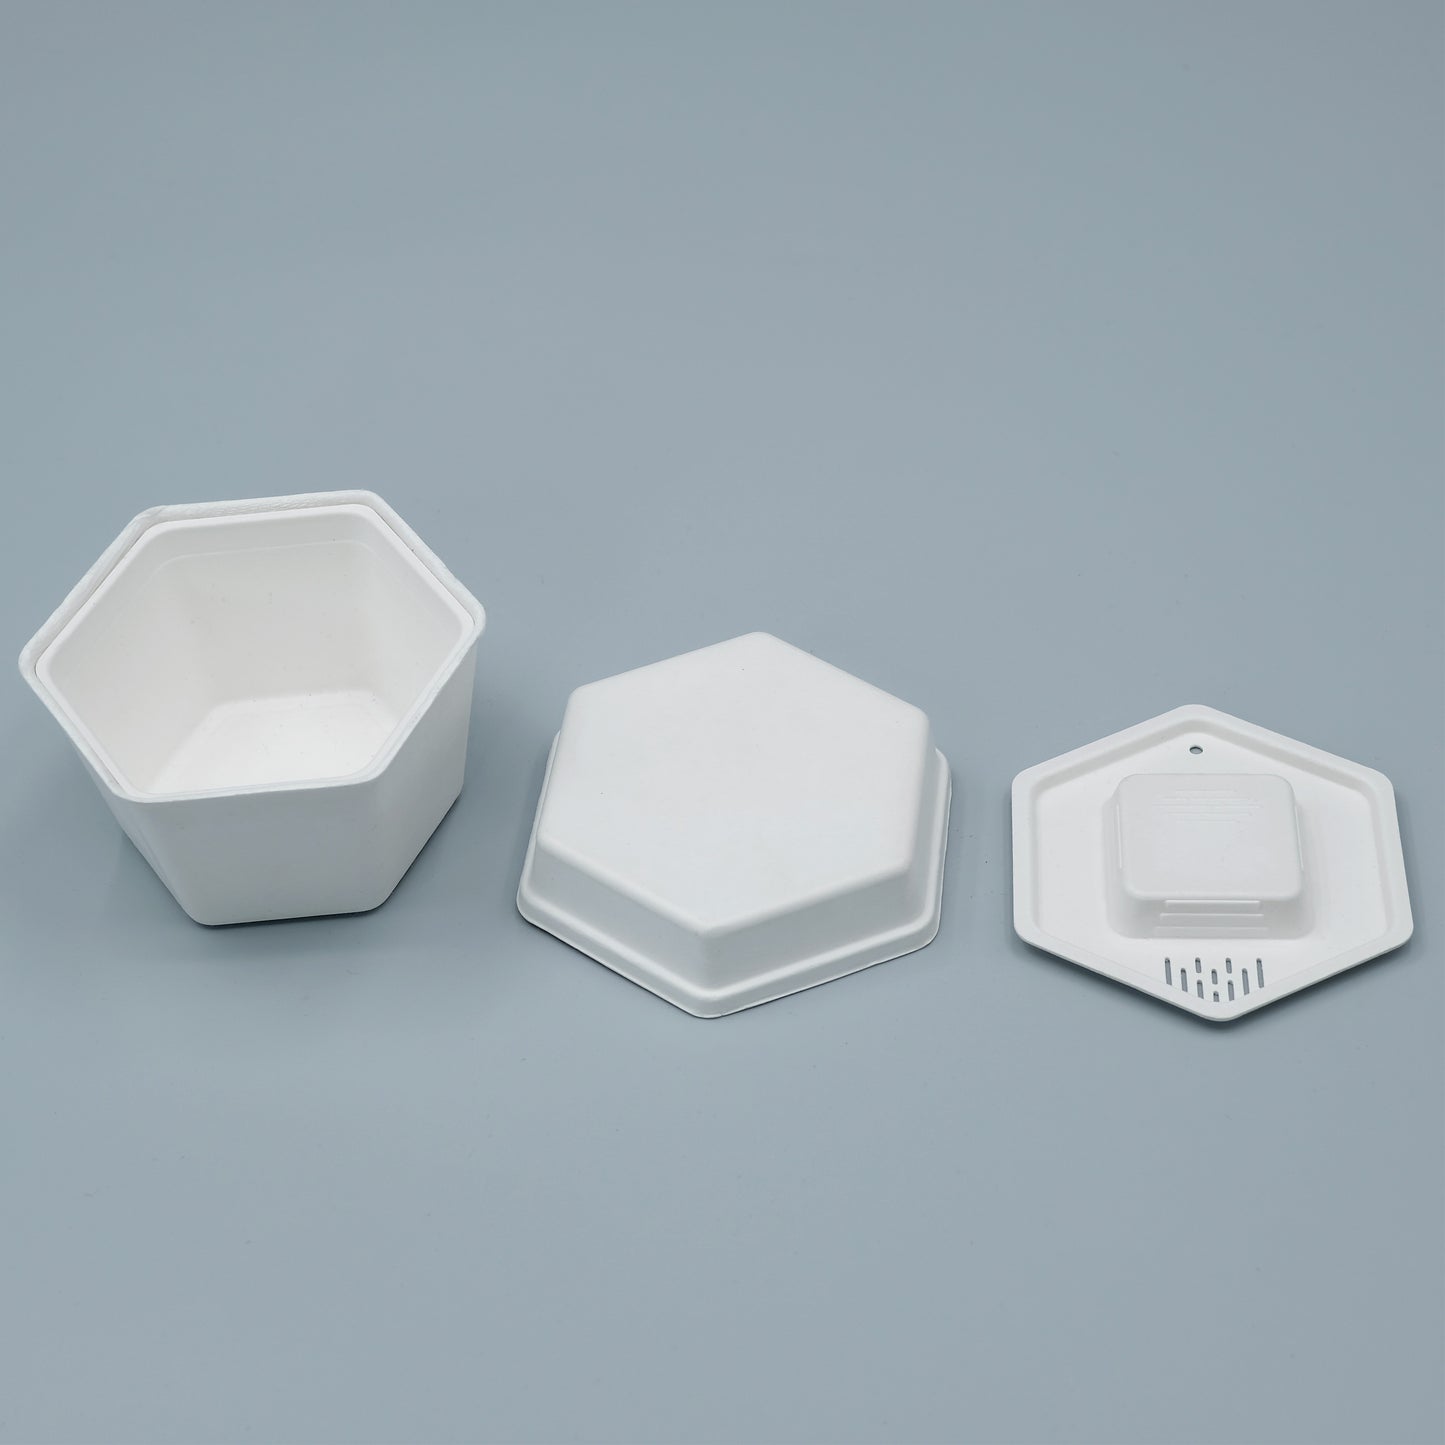 Sustainable Compact Tea Set Travel Packaging